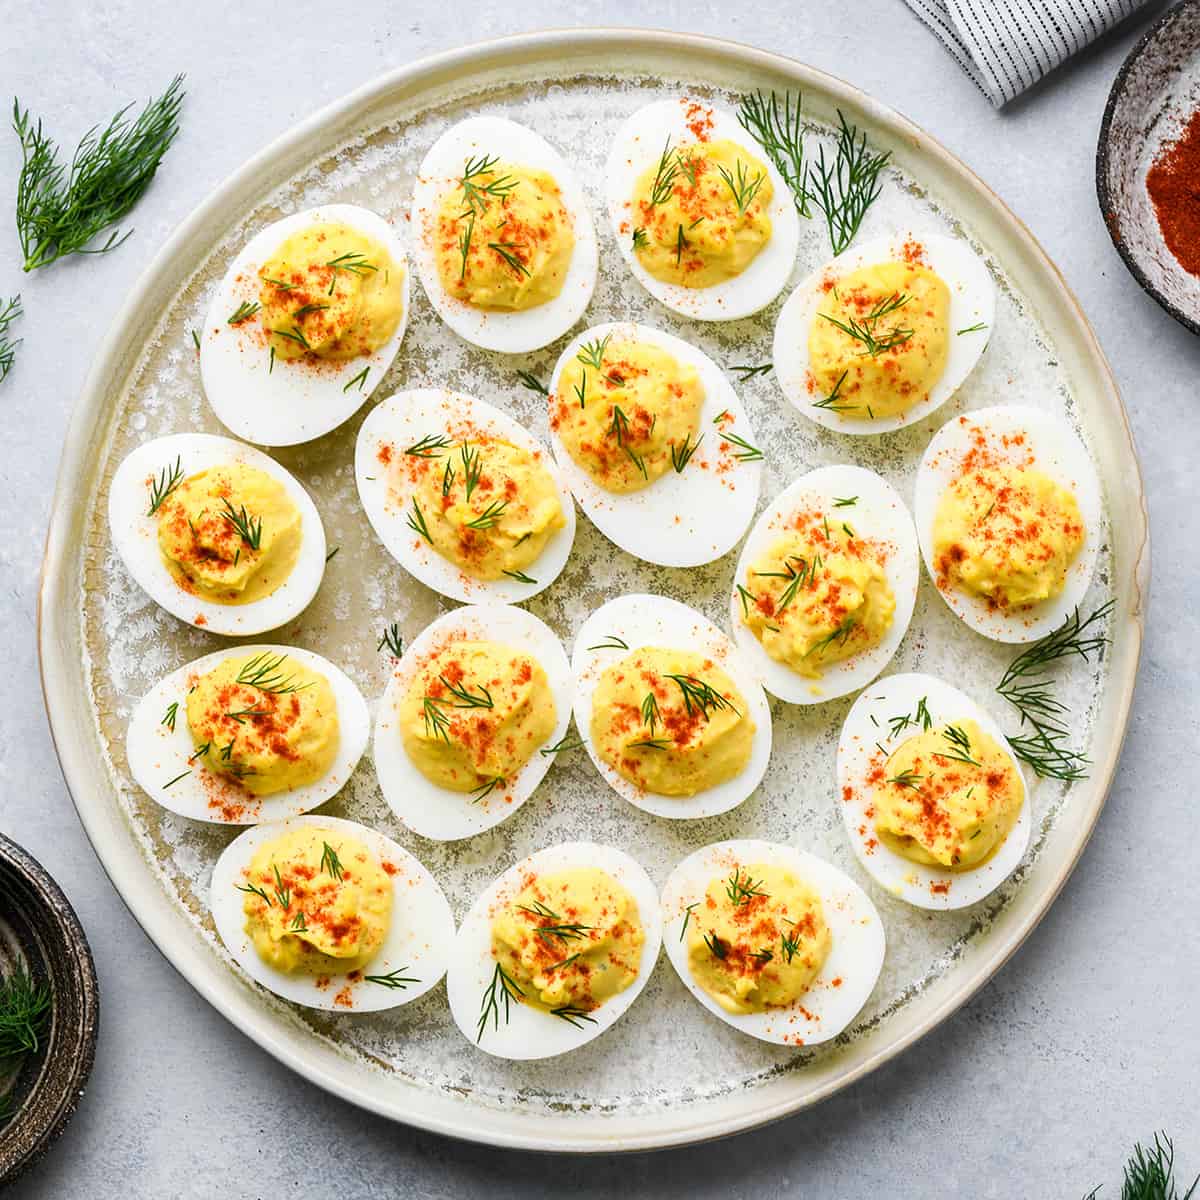 Overhead photo of a plate with 16 deviled eggs garnished with paprika and dill.